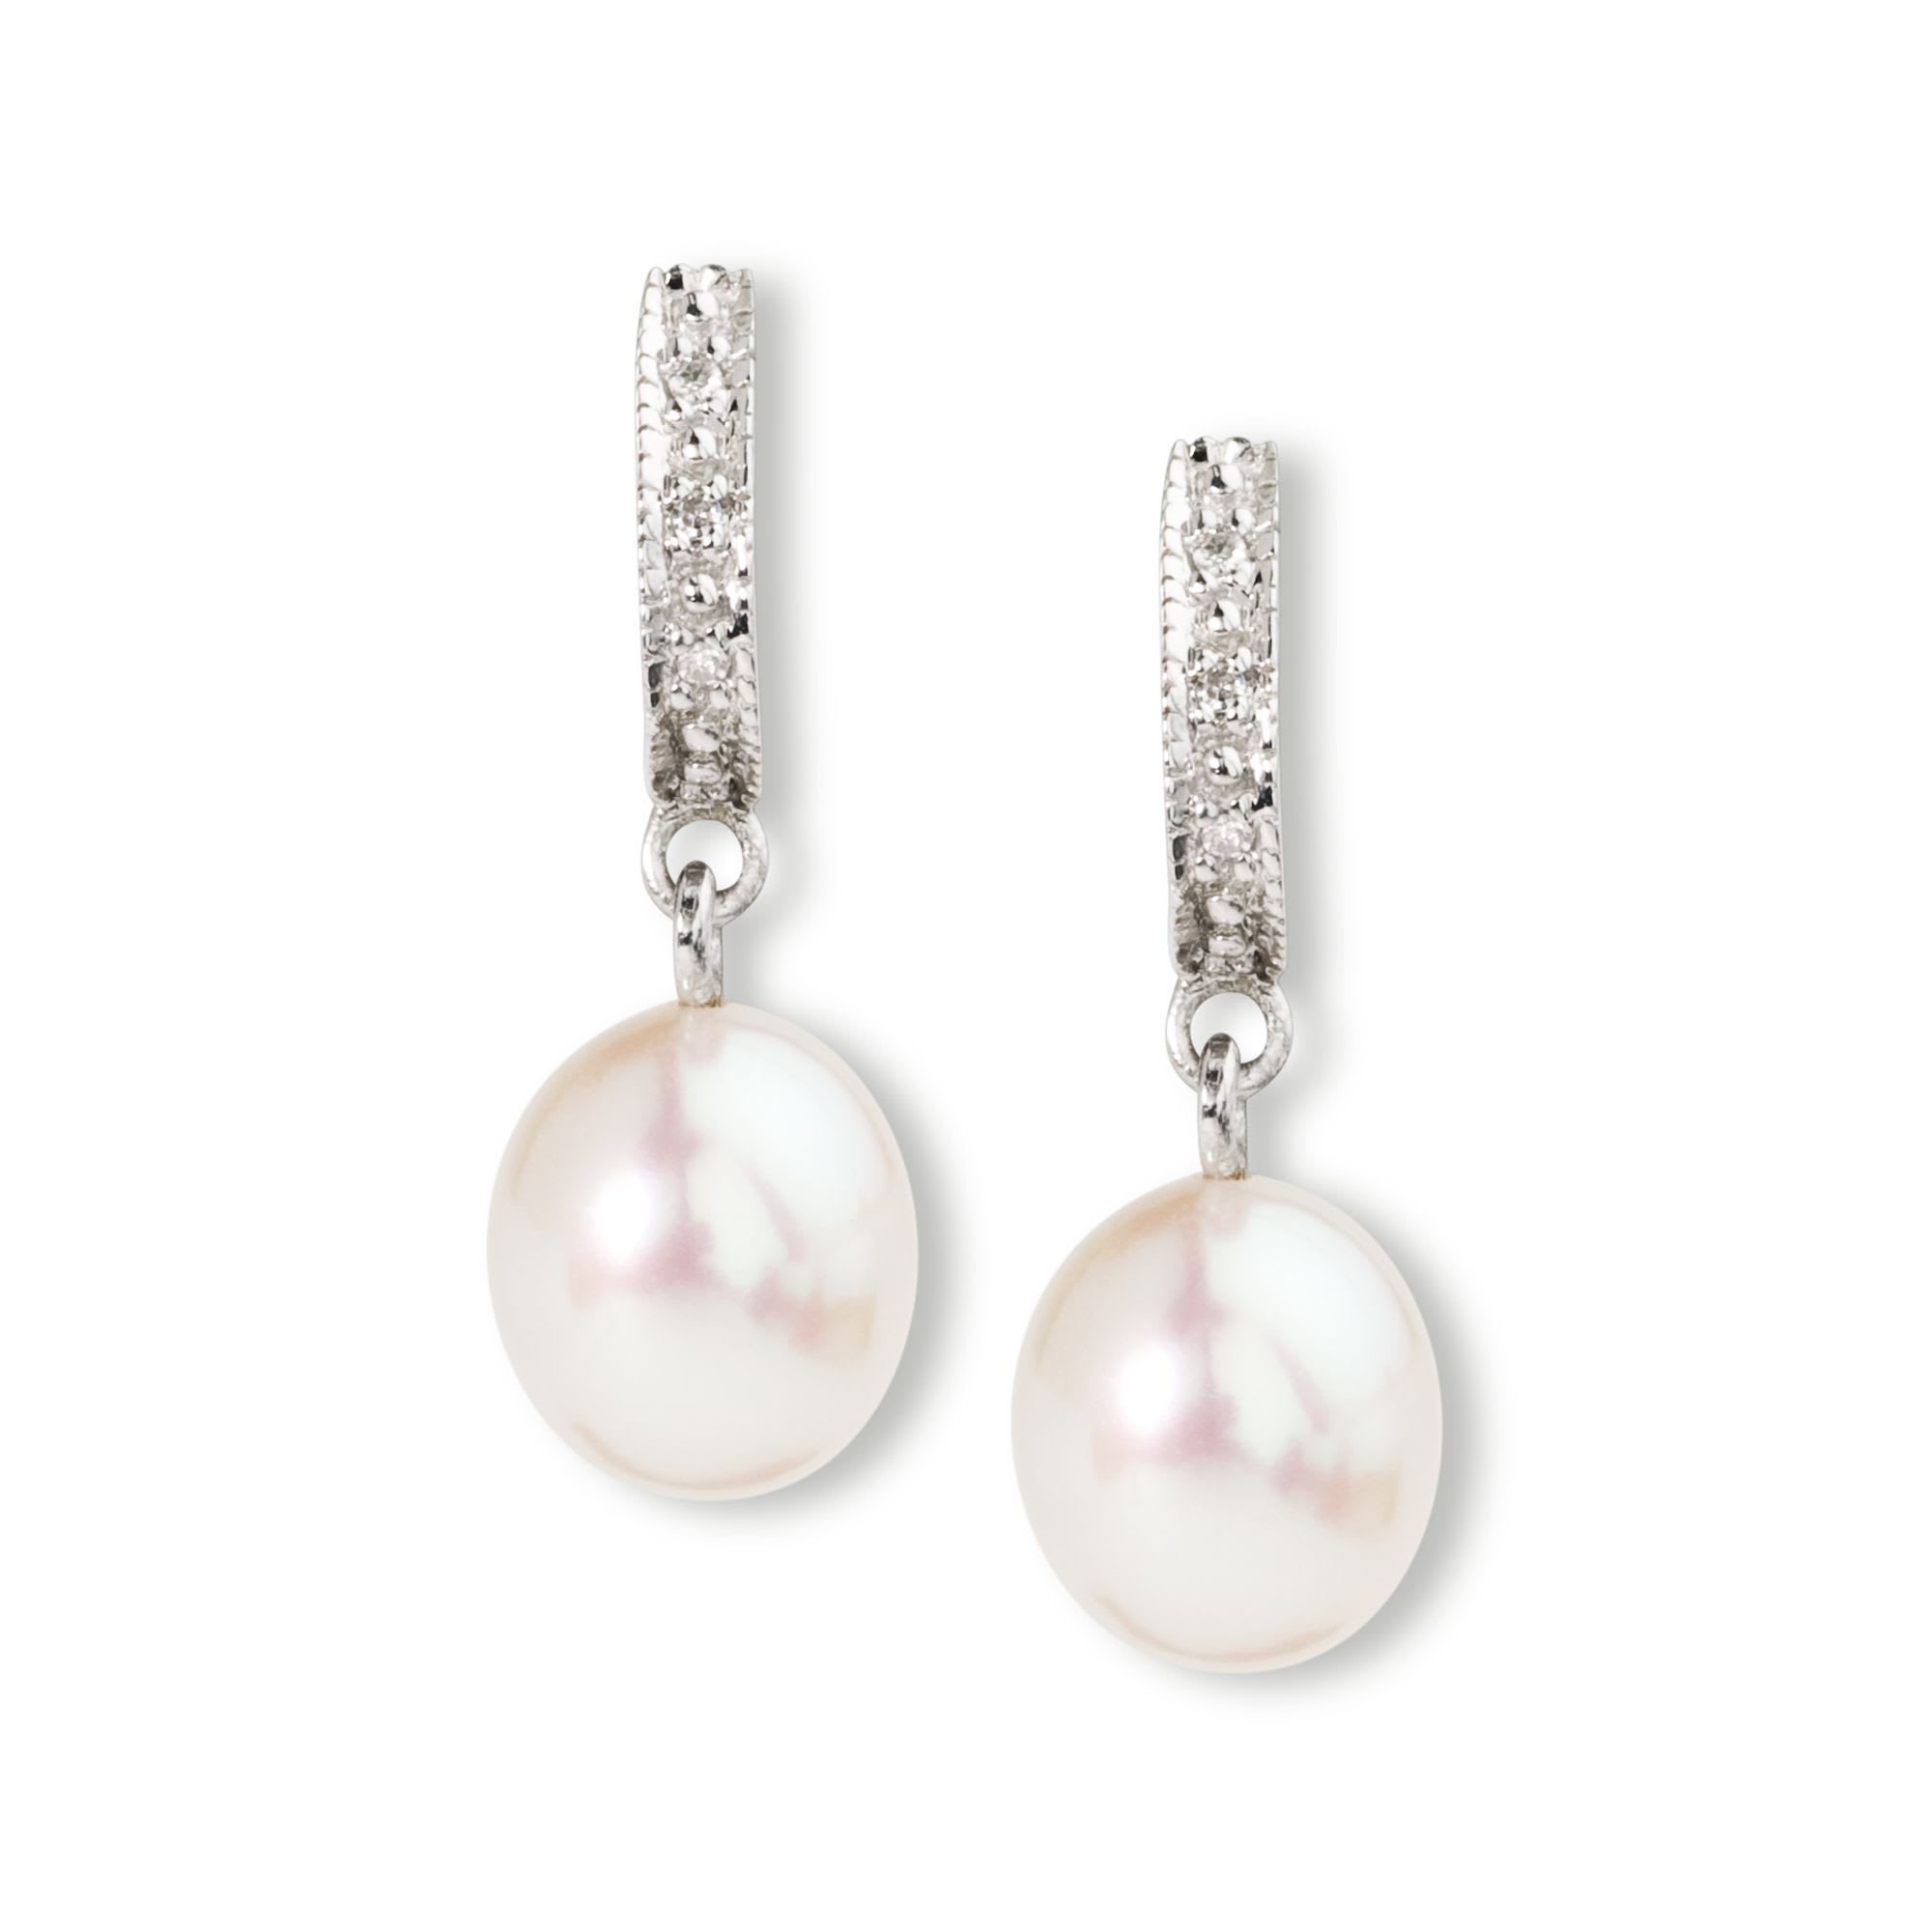 8-9mm Cultured Pearl Dangle Earrings with Diamond Accents in Sterling ...